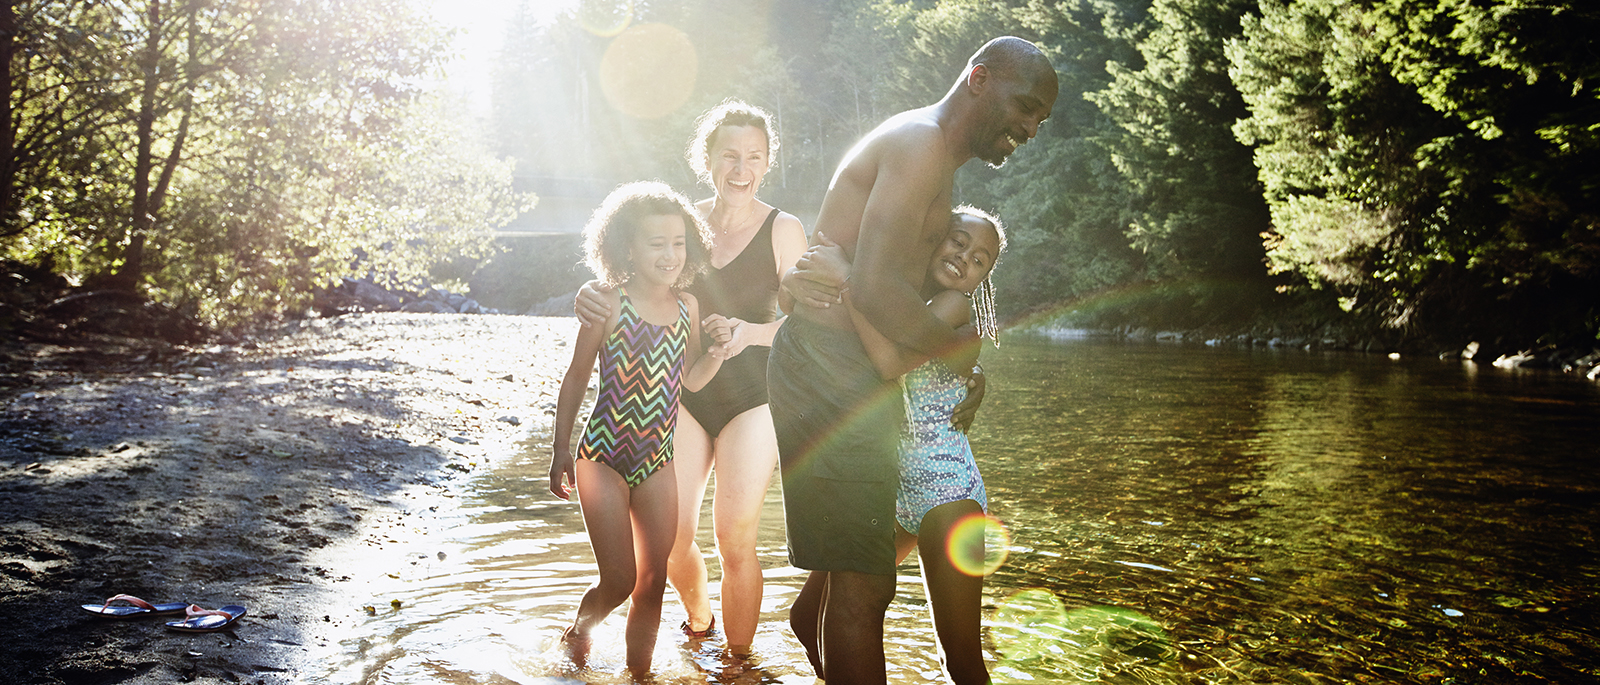 Family playing in the water by the river.